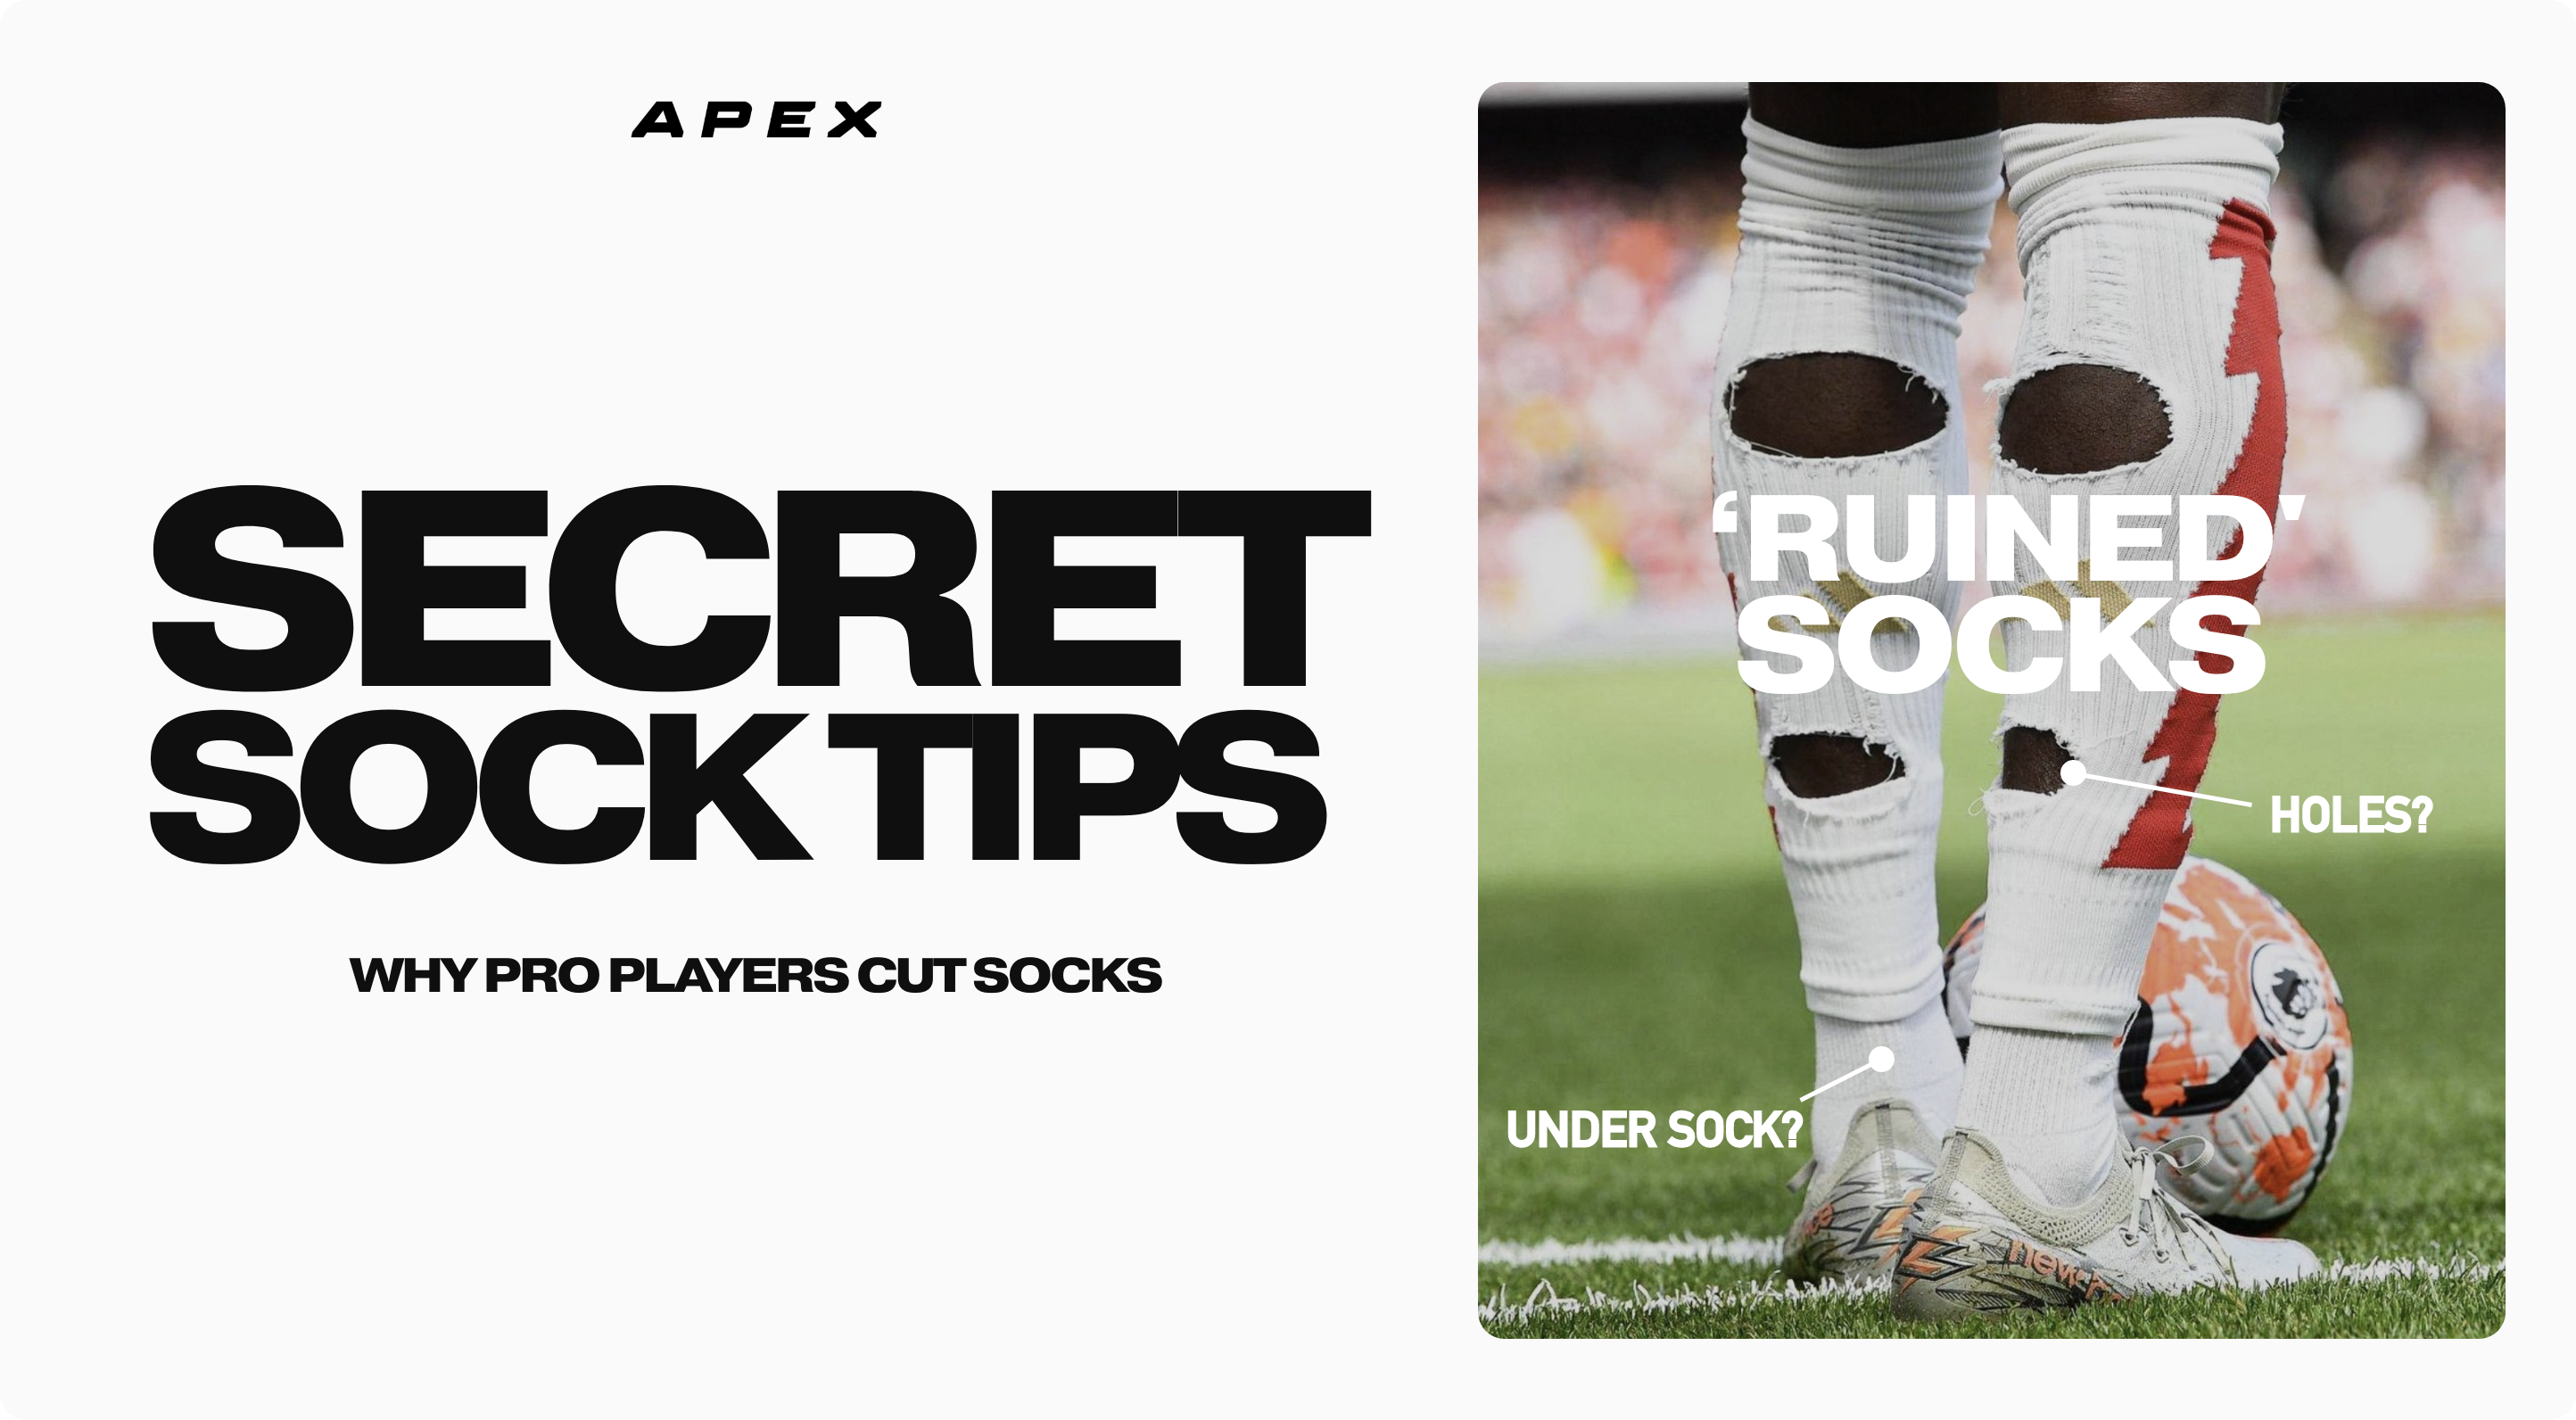 Explained: Why do footballers cut holes in their socks?